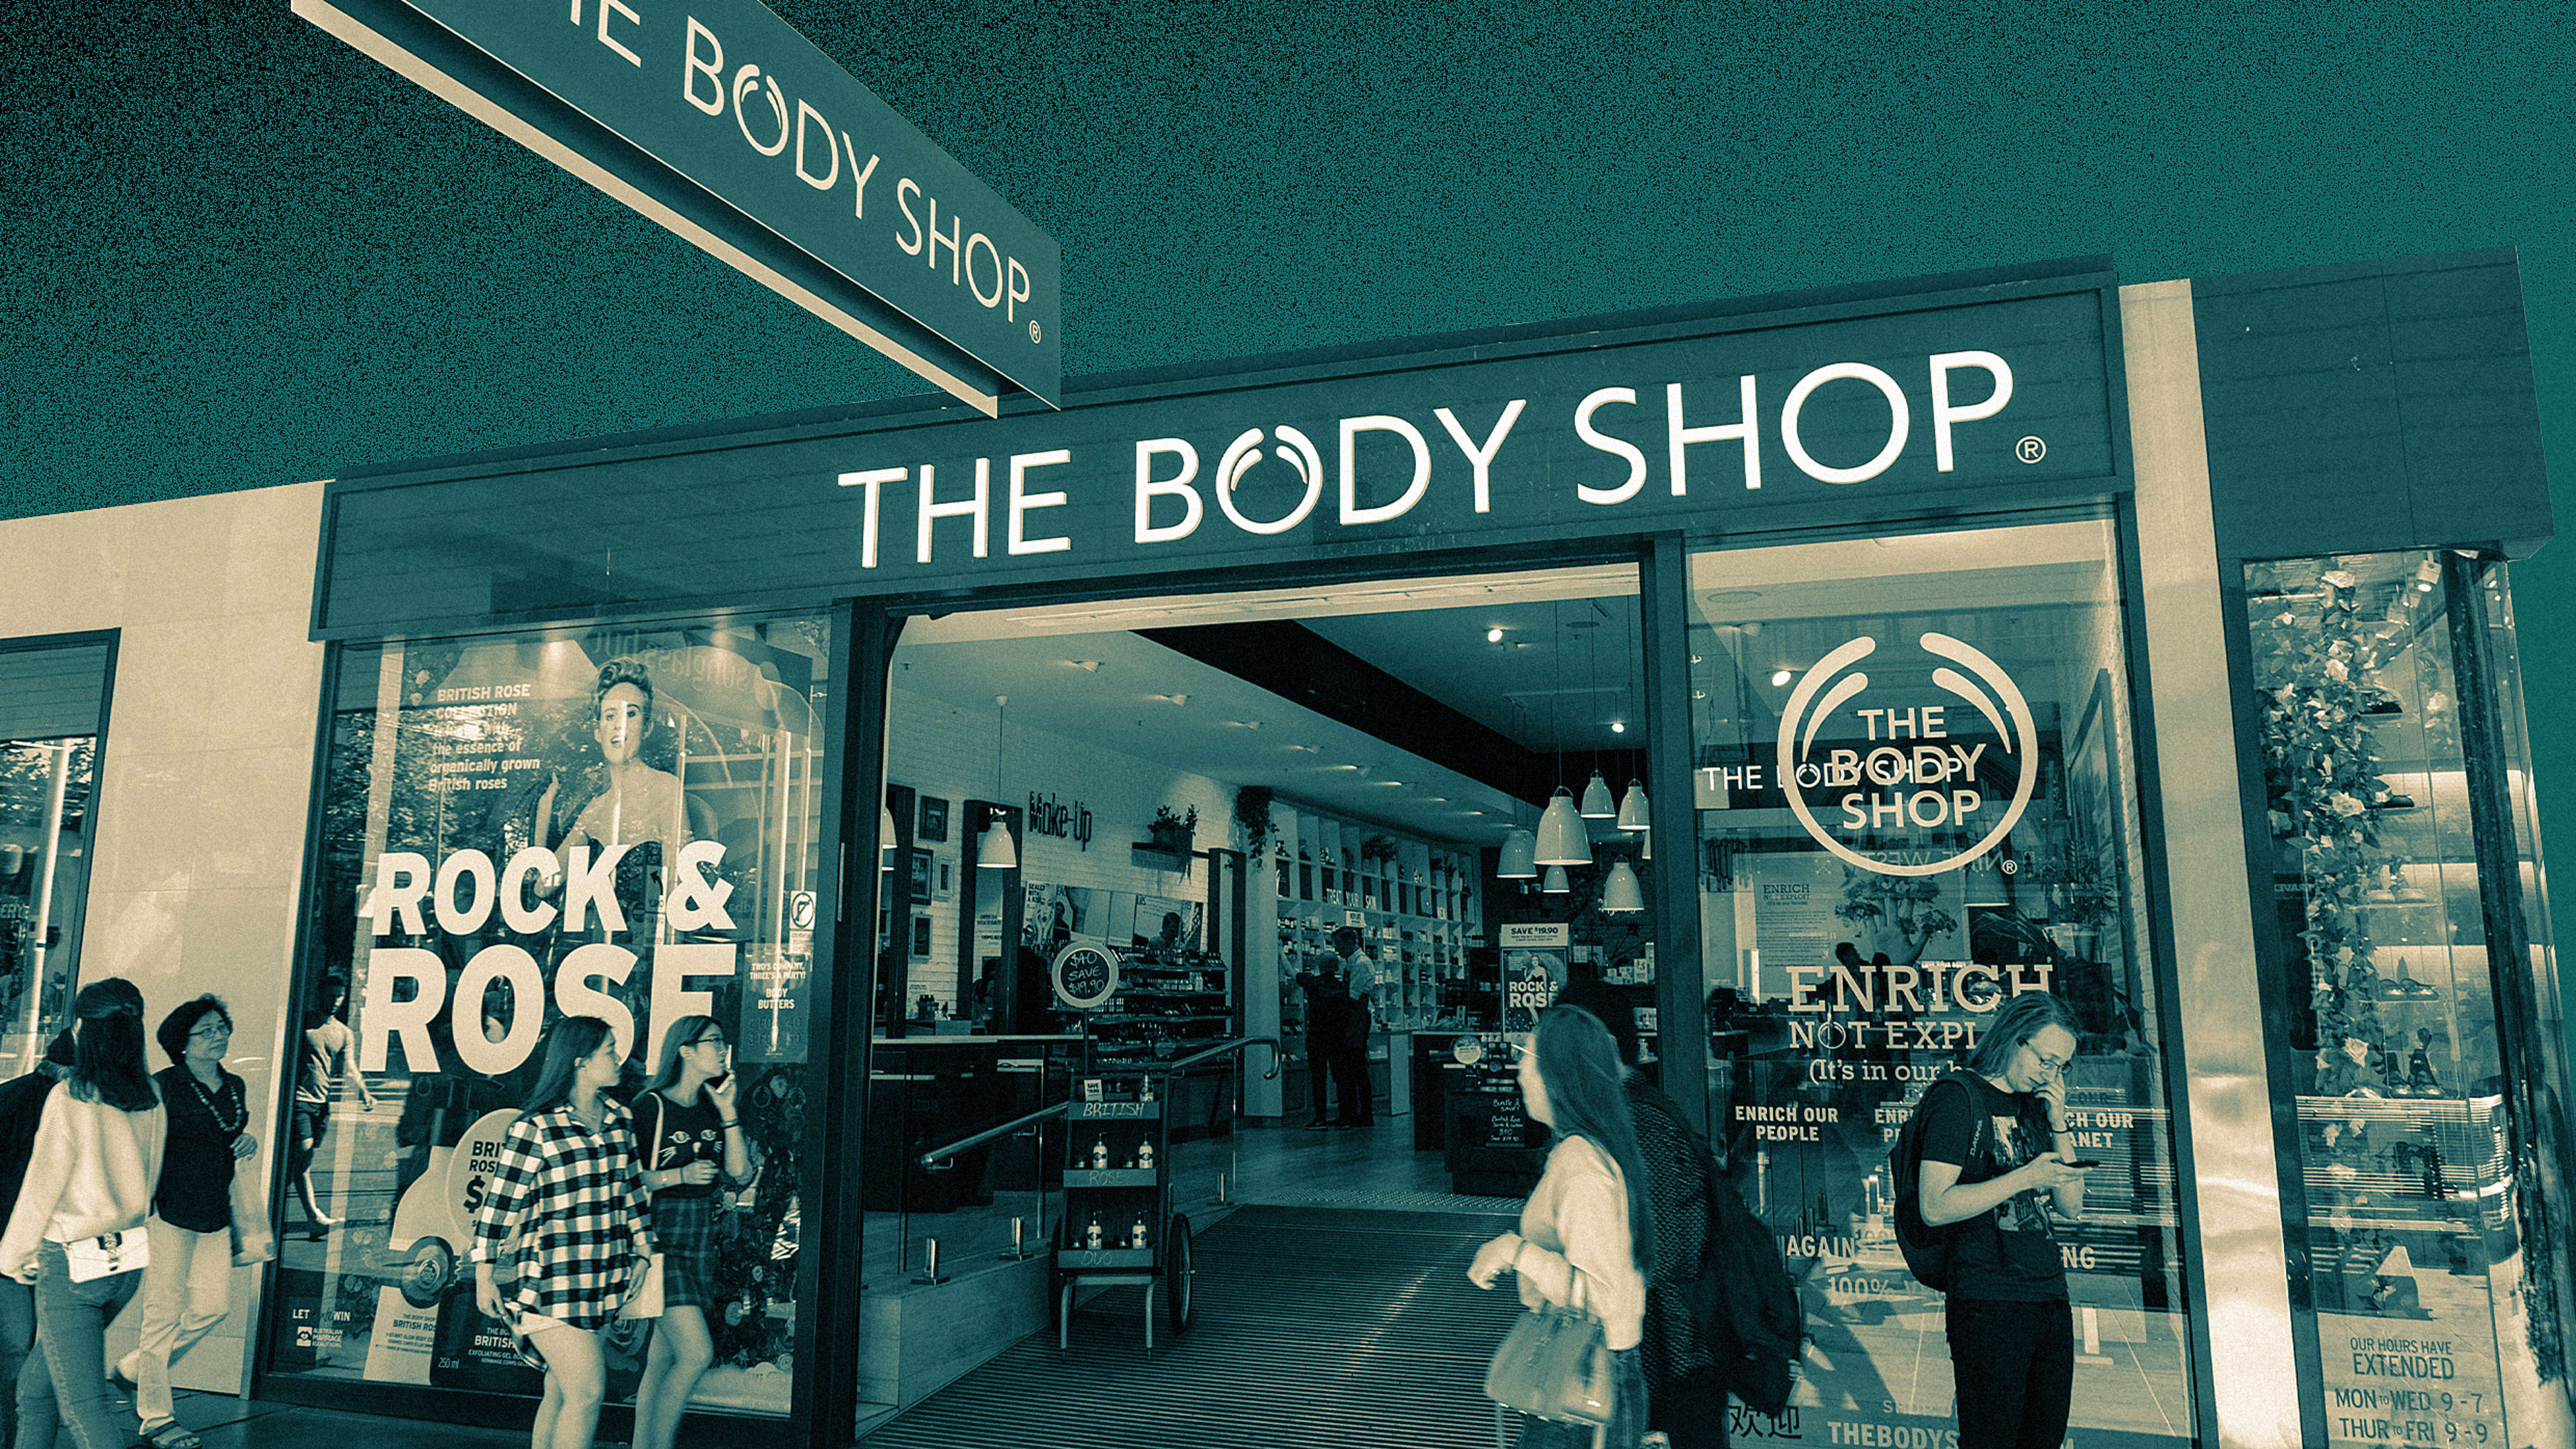 The Body Shop will start hiring the first person who applies for any retail job